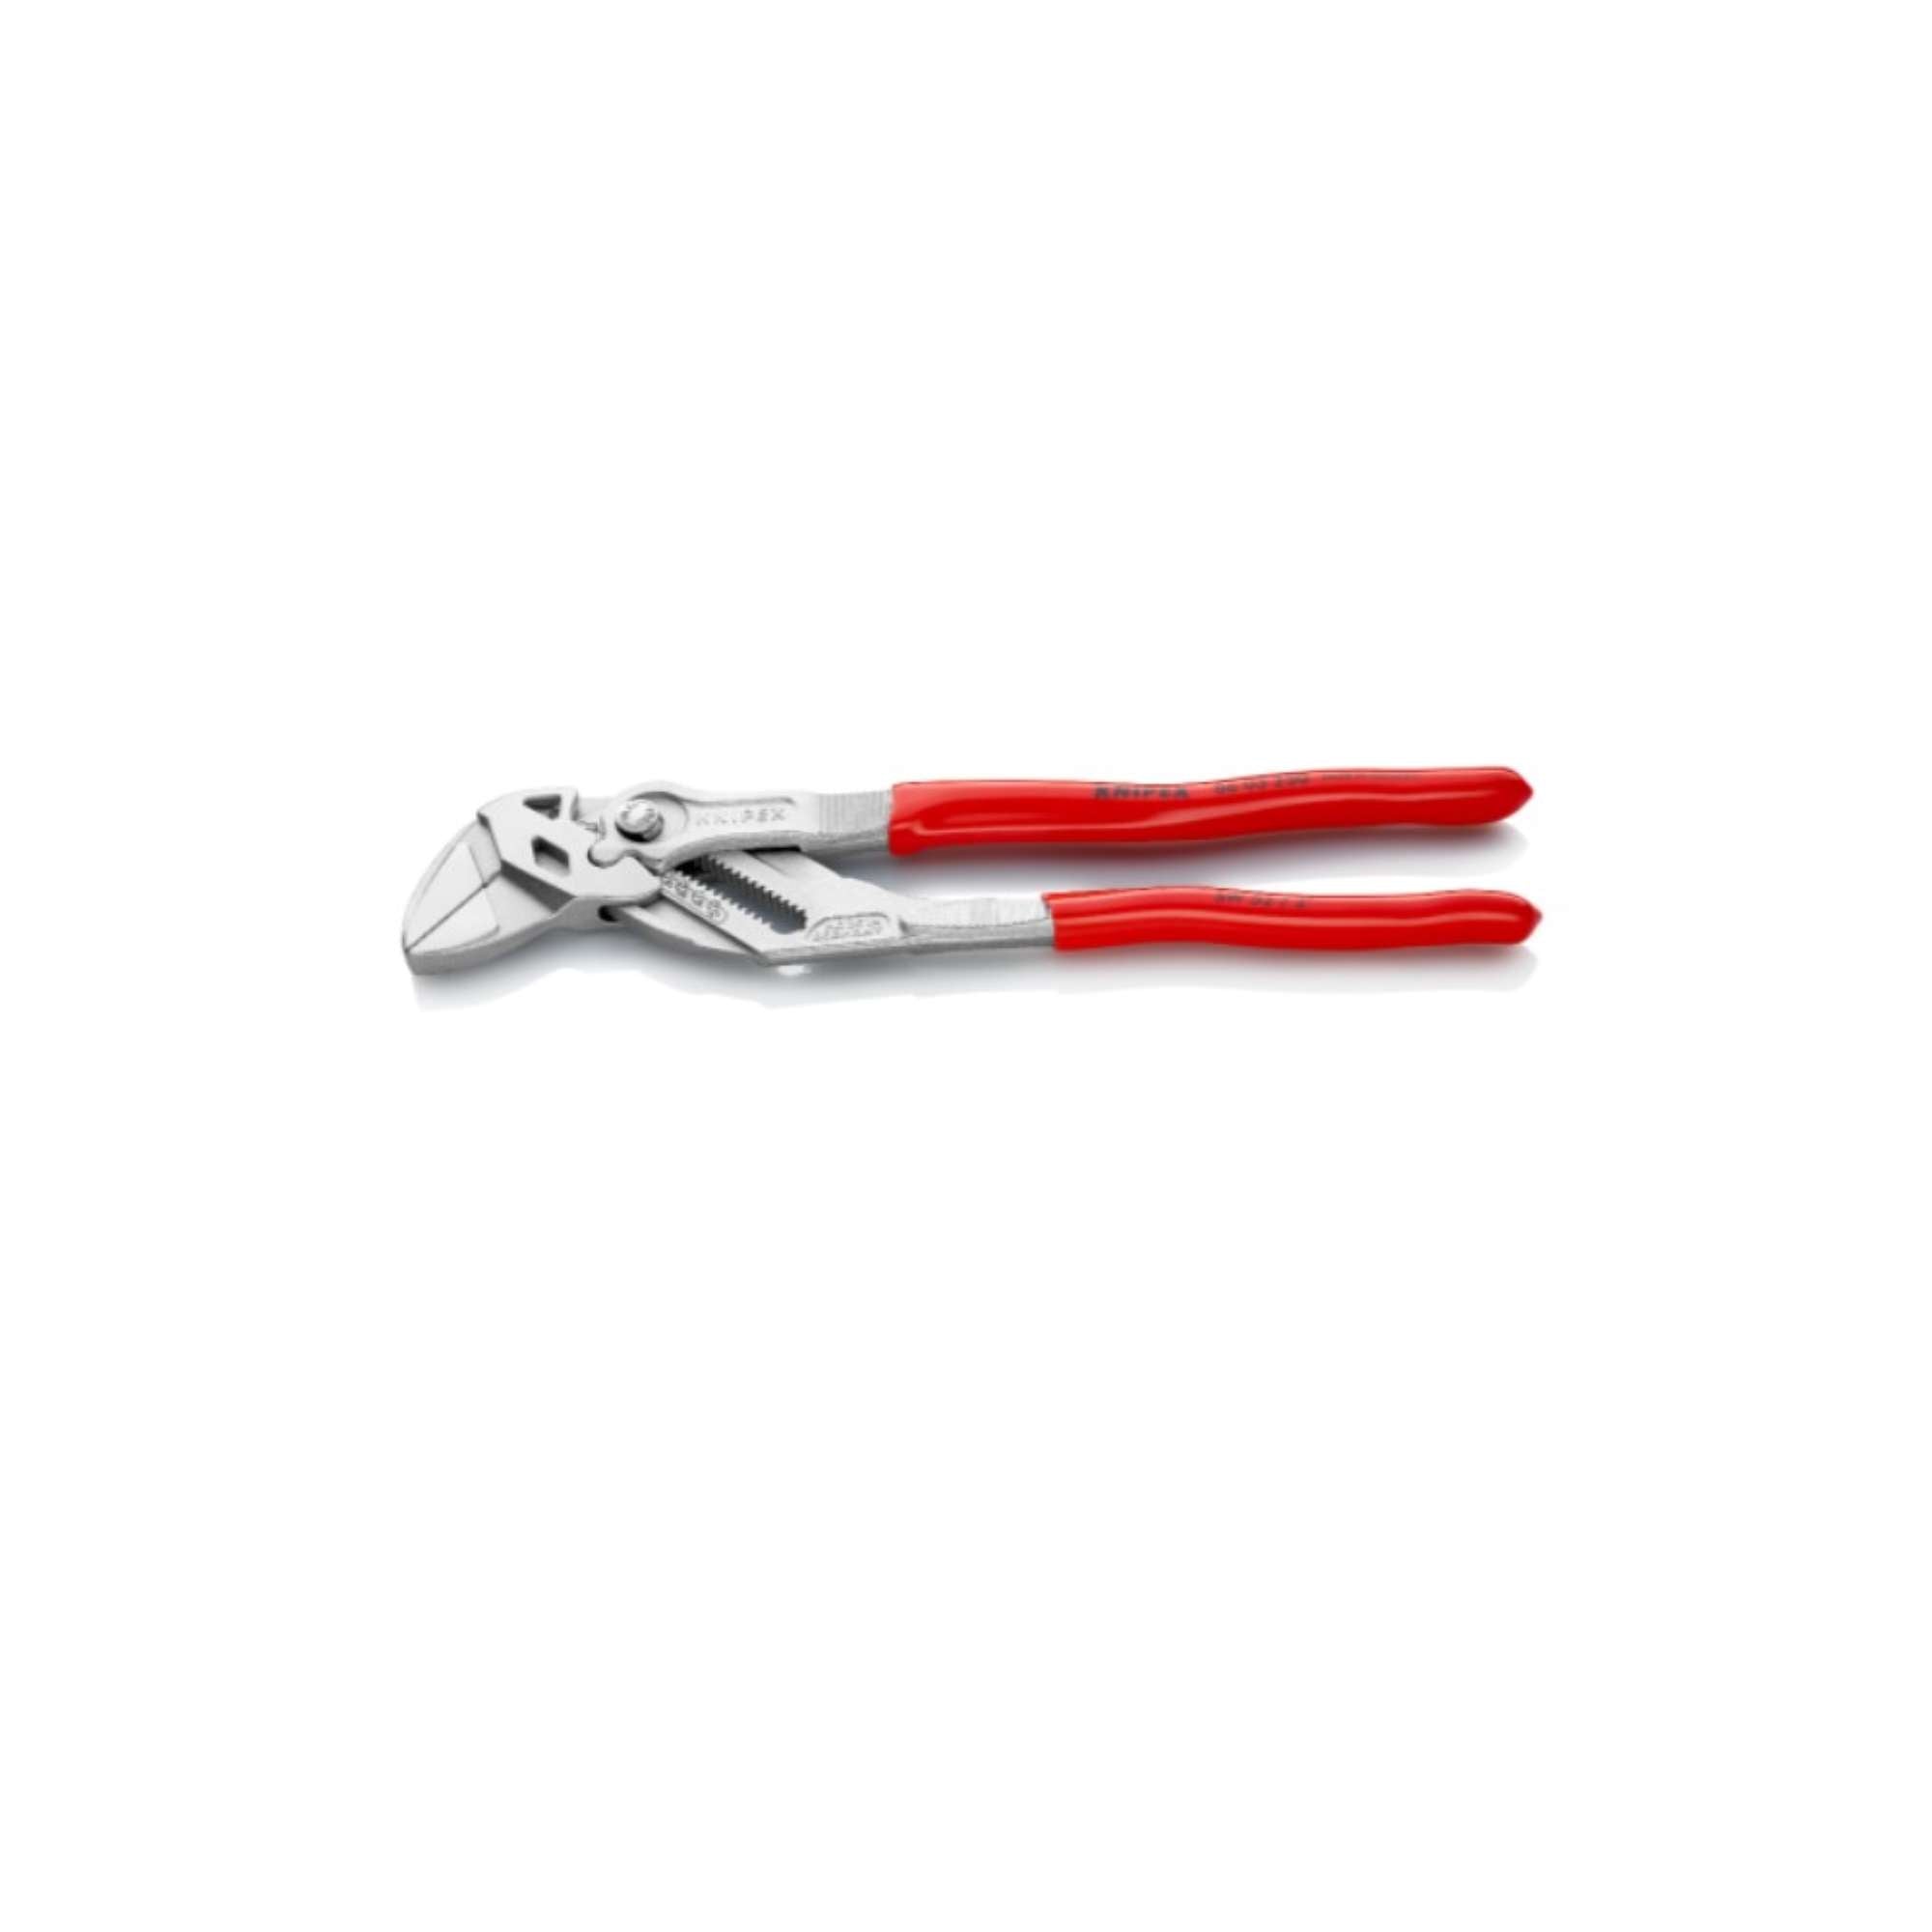 Chrome-plated Adjustable Wrench Pliers 250 mm long - KNIPEX 86 03 250